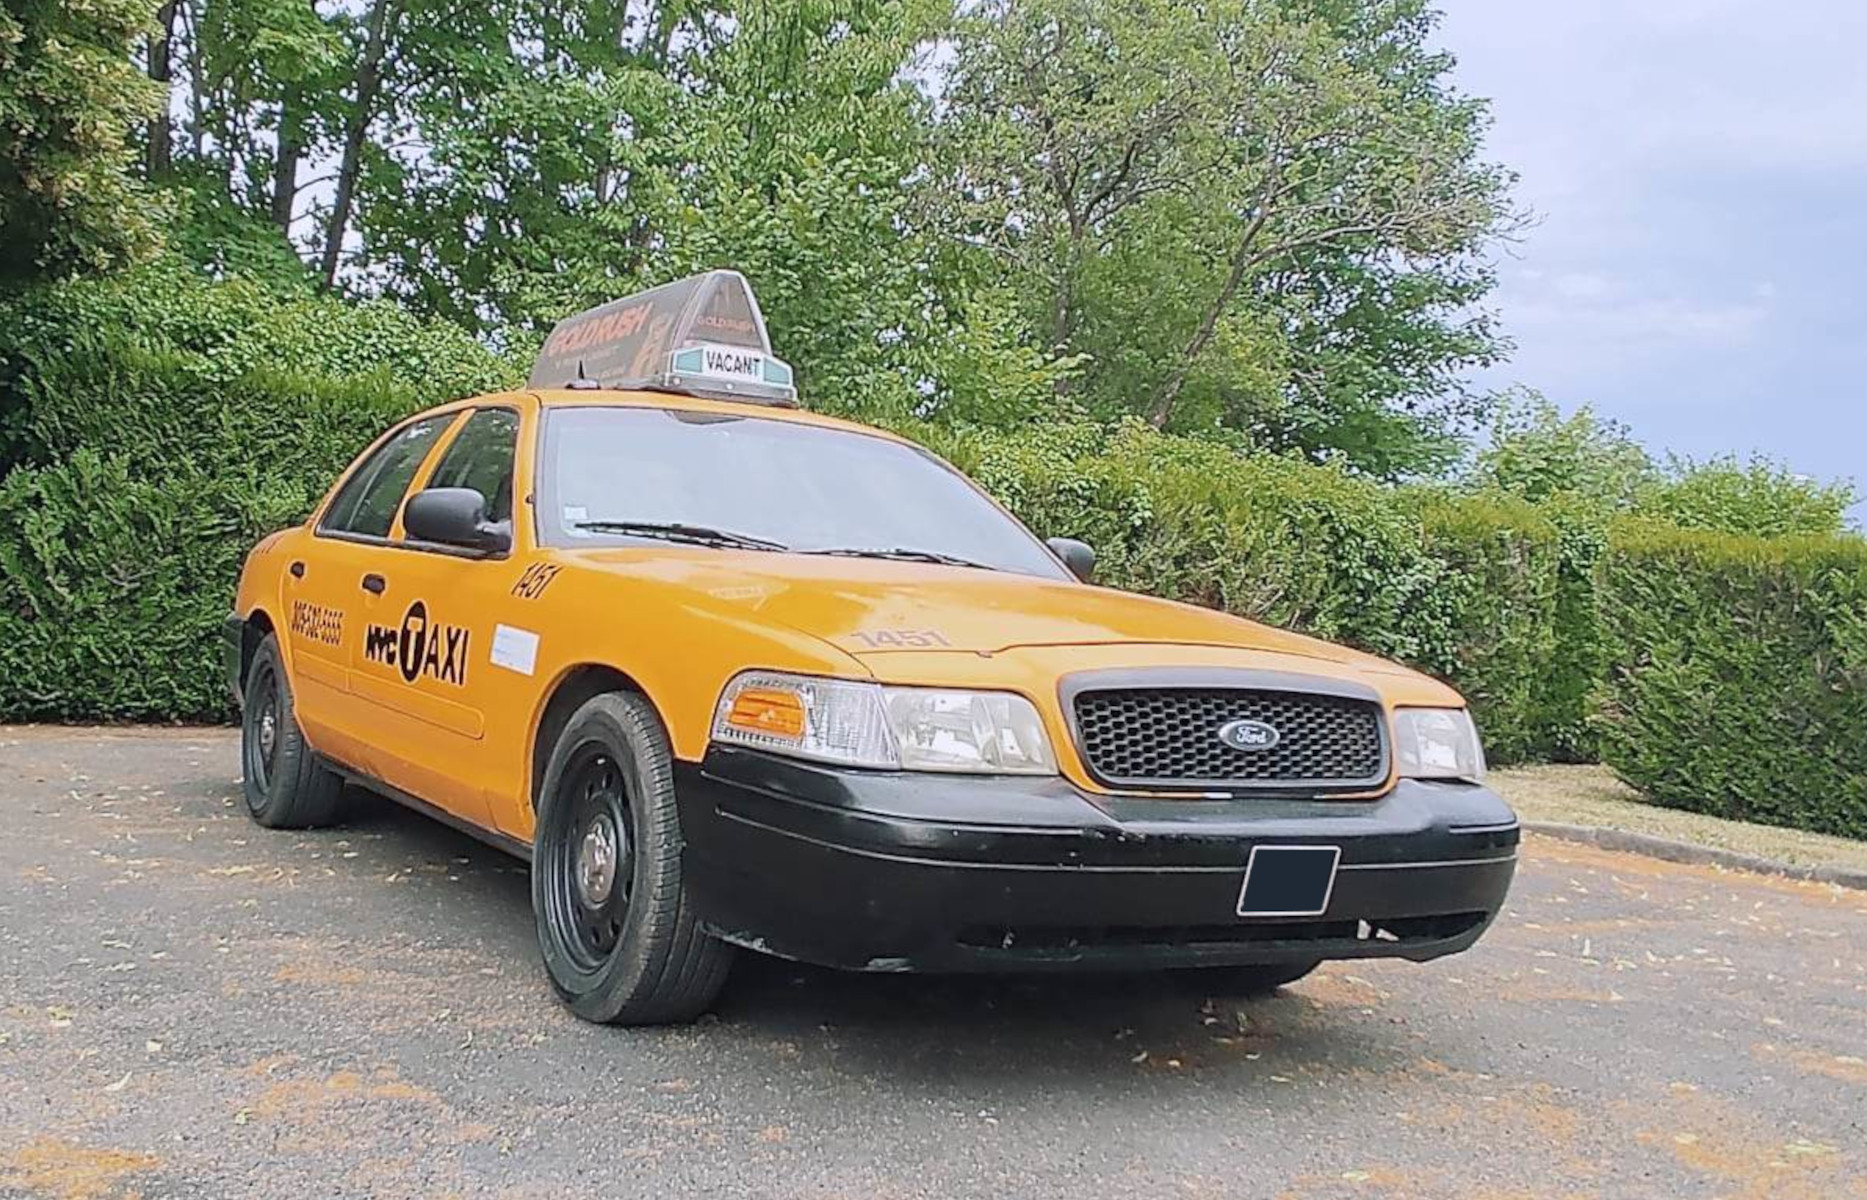 New york yellow cab to rent